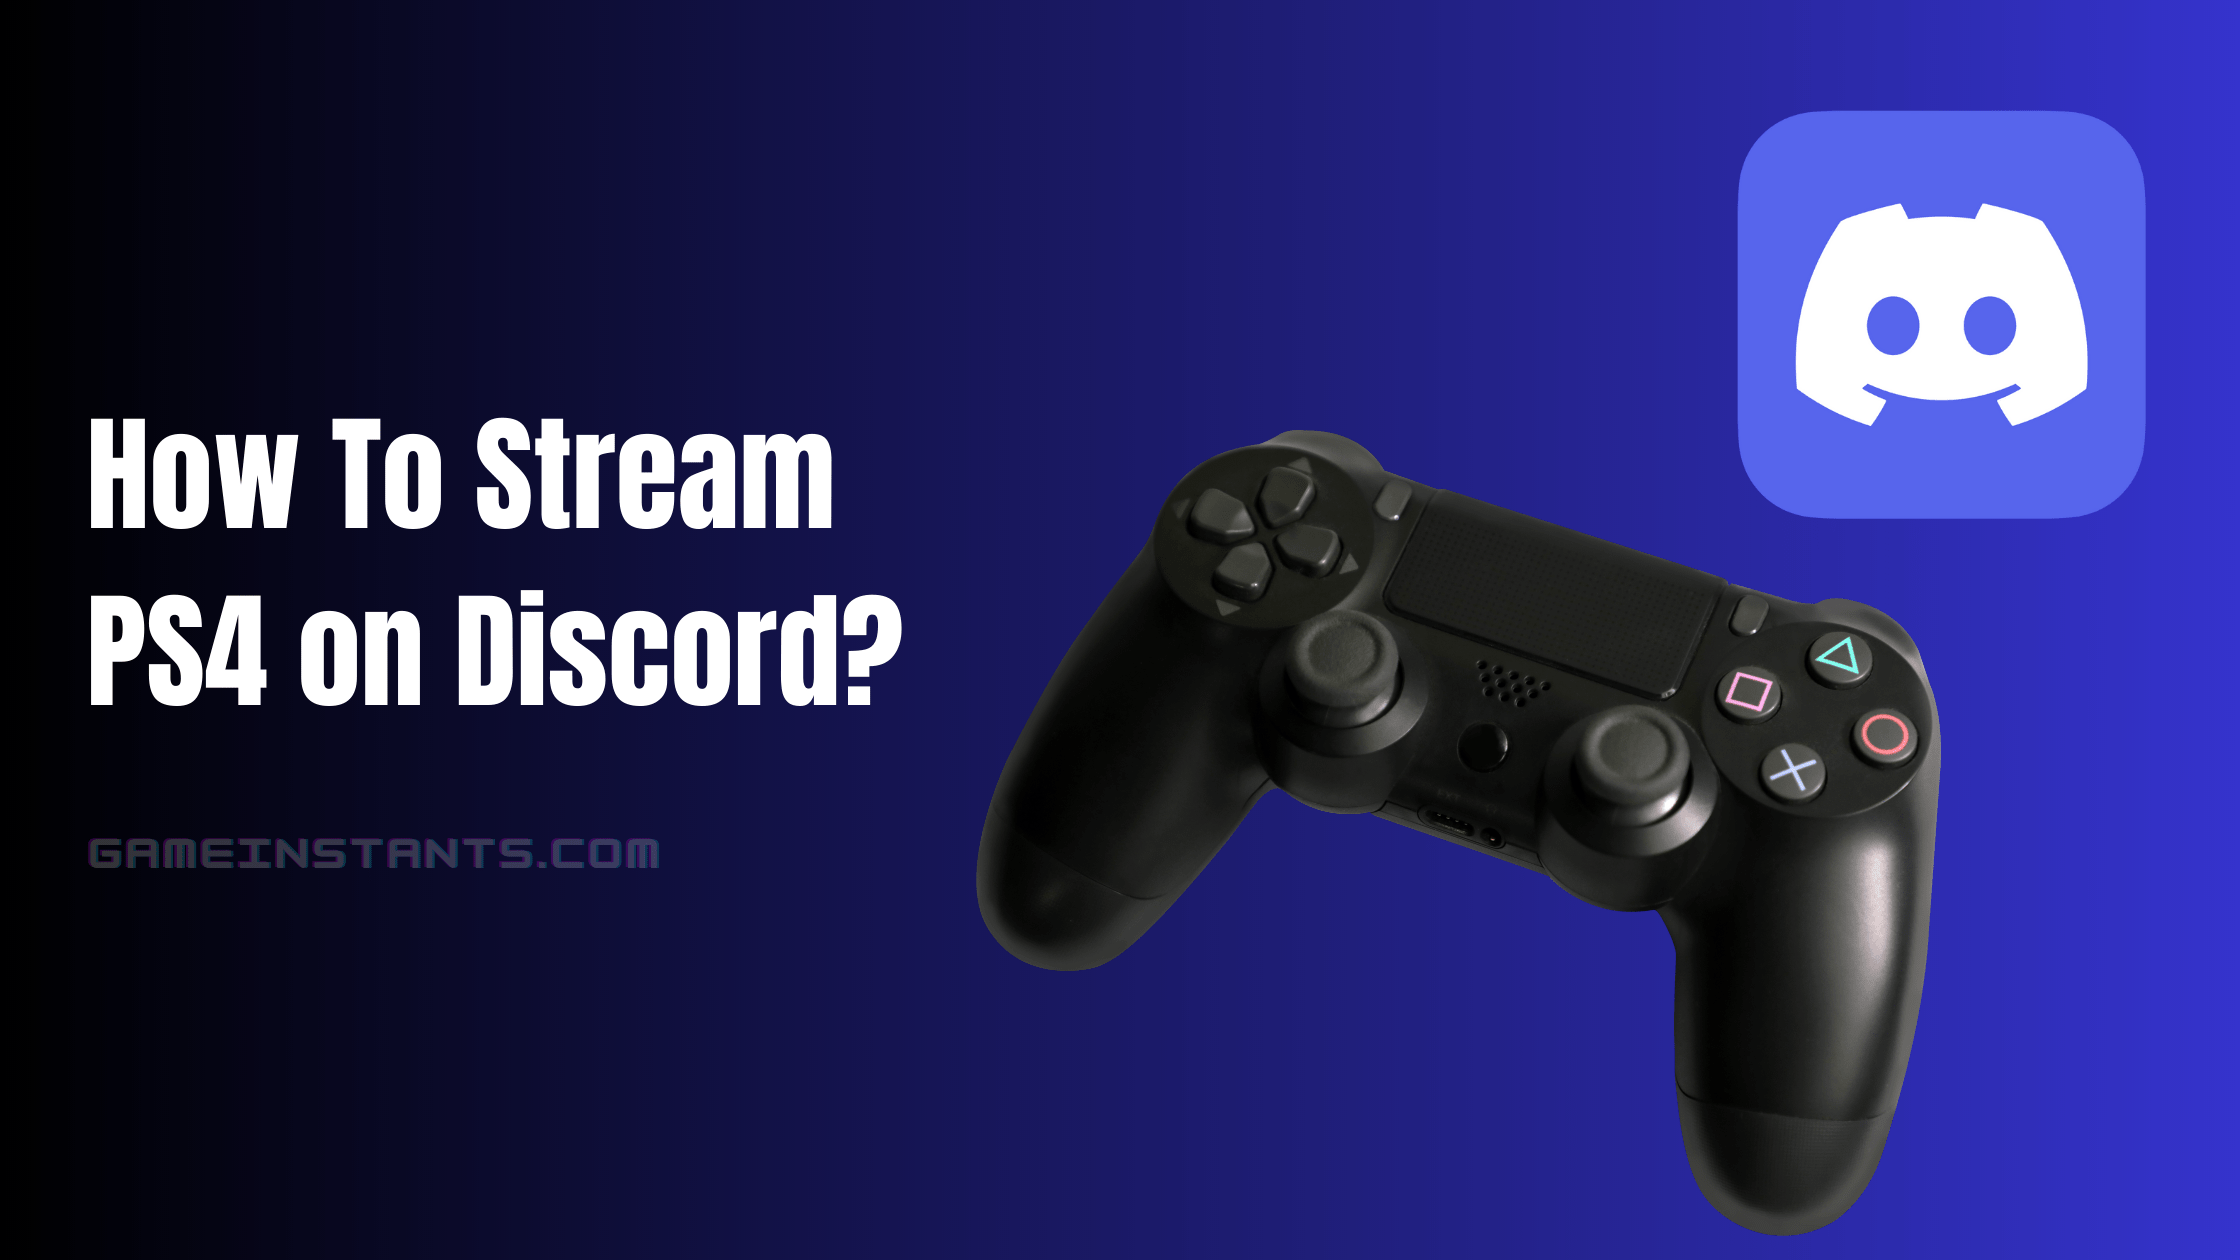 How To Stream PS4 on Discord